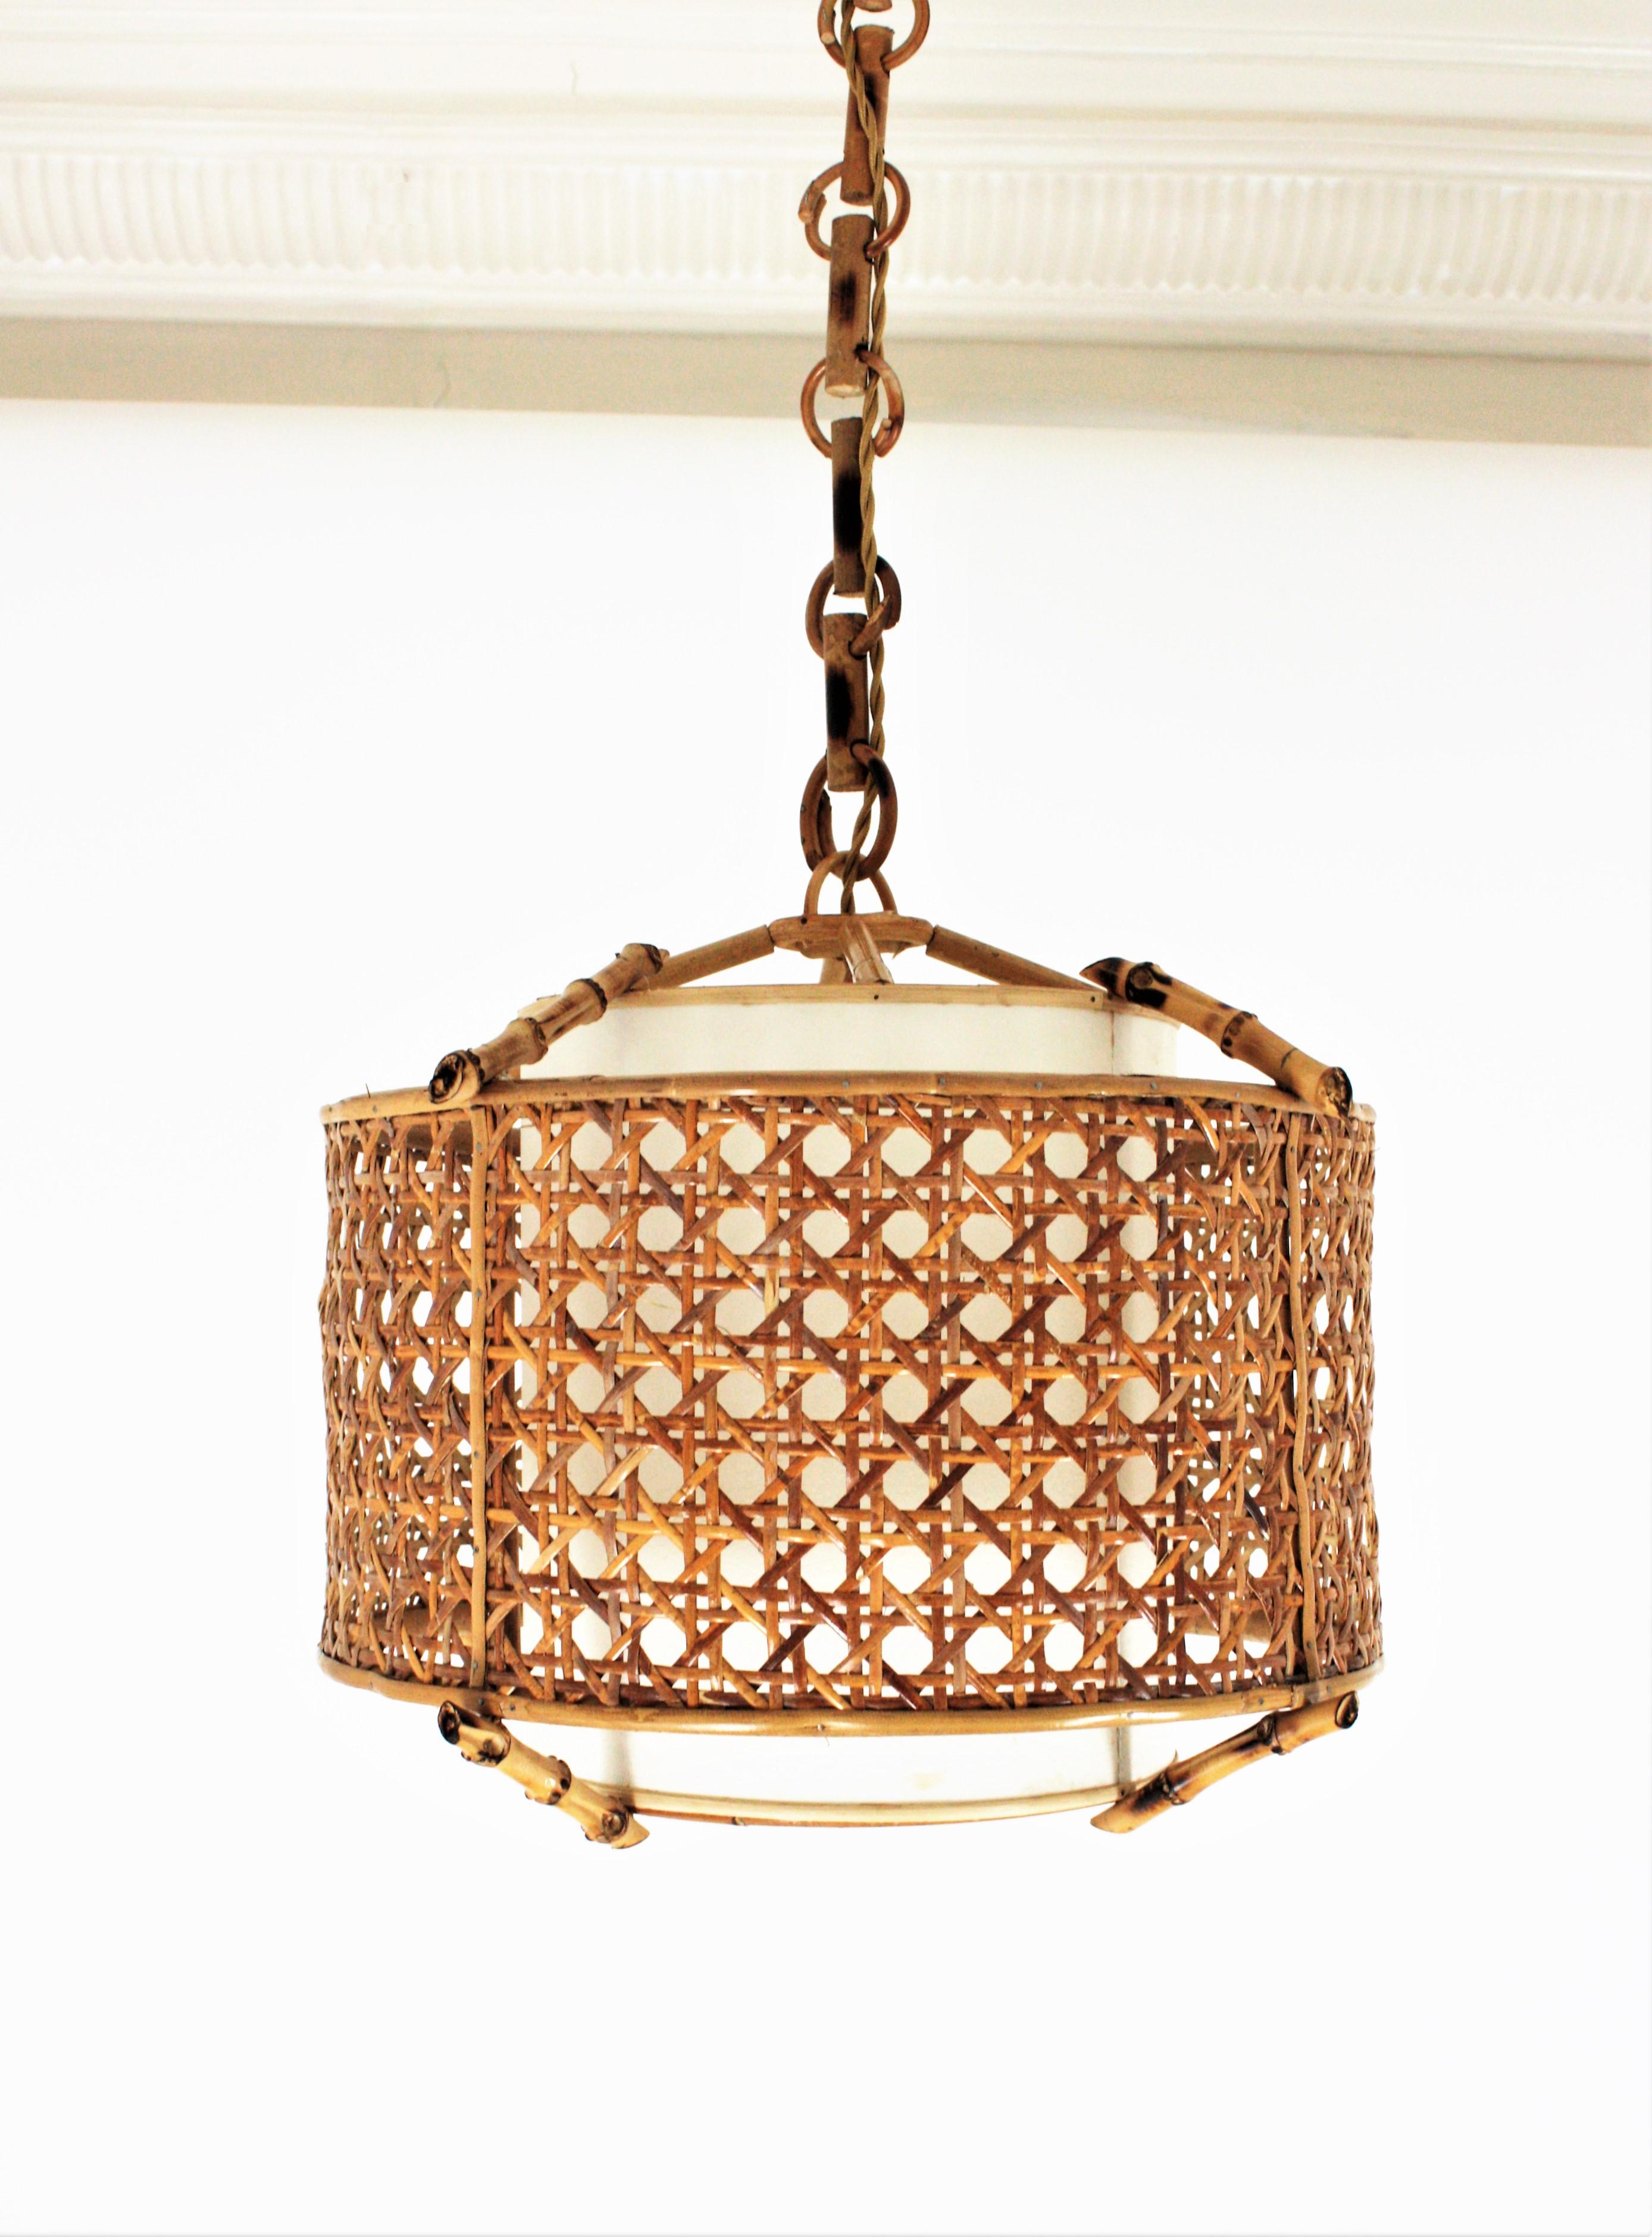 Spanish 1960s Mid-Century Modern bamboo and wicker wire large pendant lamp or lantern.
This suspension lamp features a drum shape woven wicker drum shaped lampshade accented by rattan and bamboo sticks. It has an interior cylindrical paper